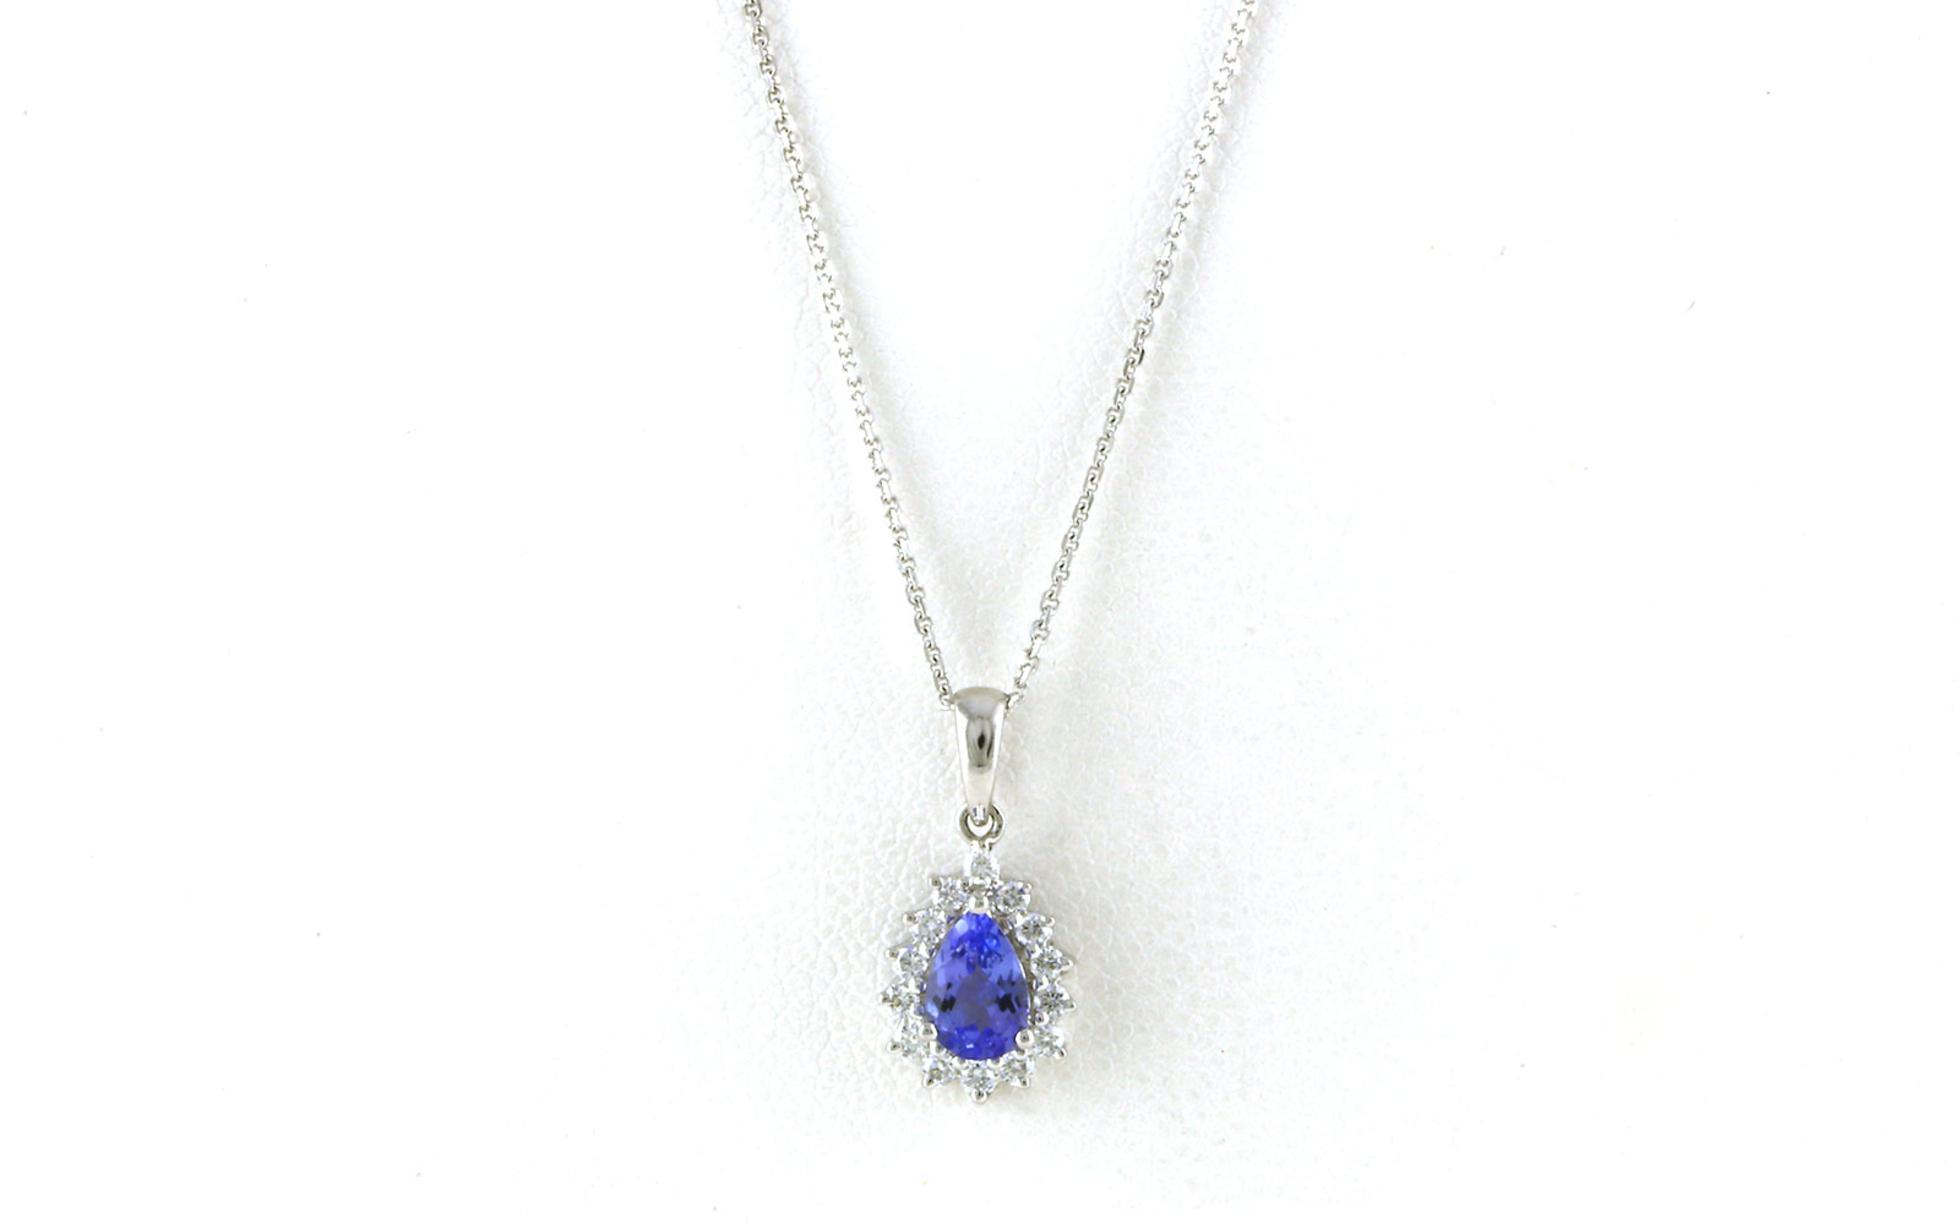 Halo-style Pear-cut Tanzanite and Diamond Necklace in White Gold (0.63cts TWT)